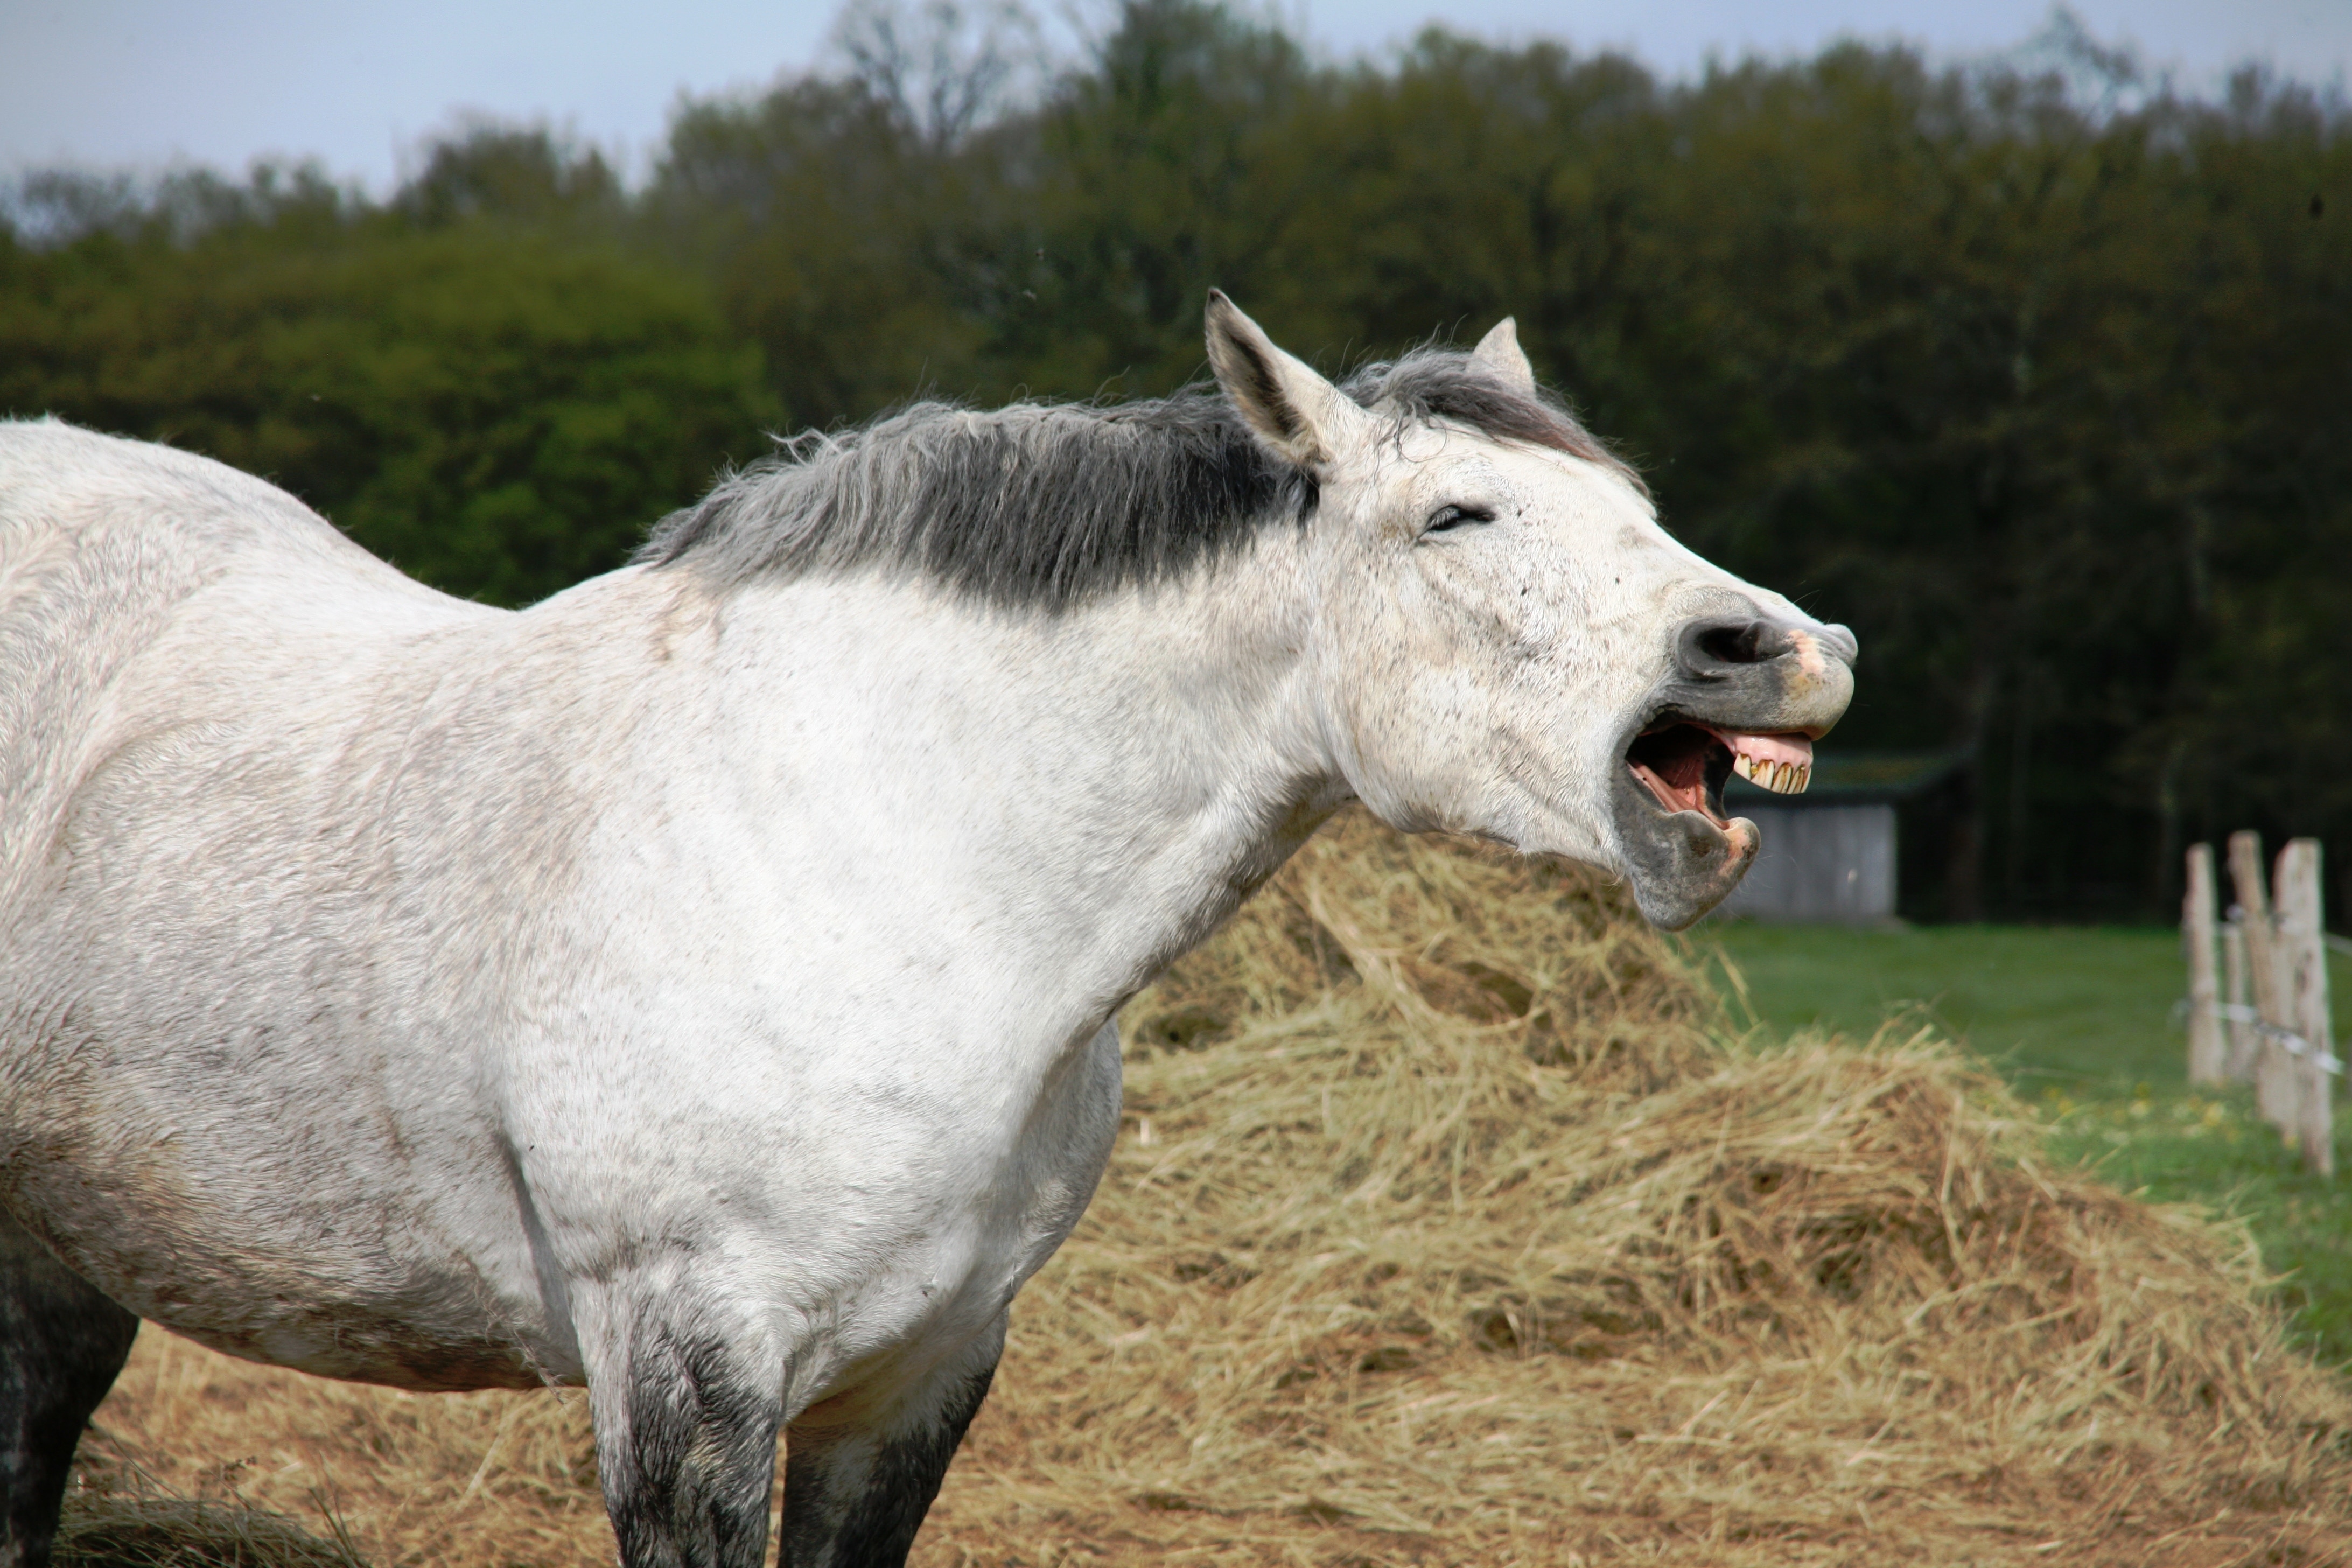 white and grey horse opening mouth near tall trees during daytime